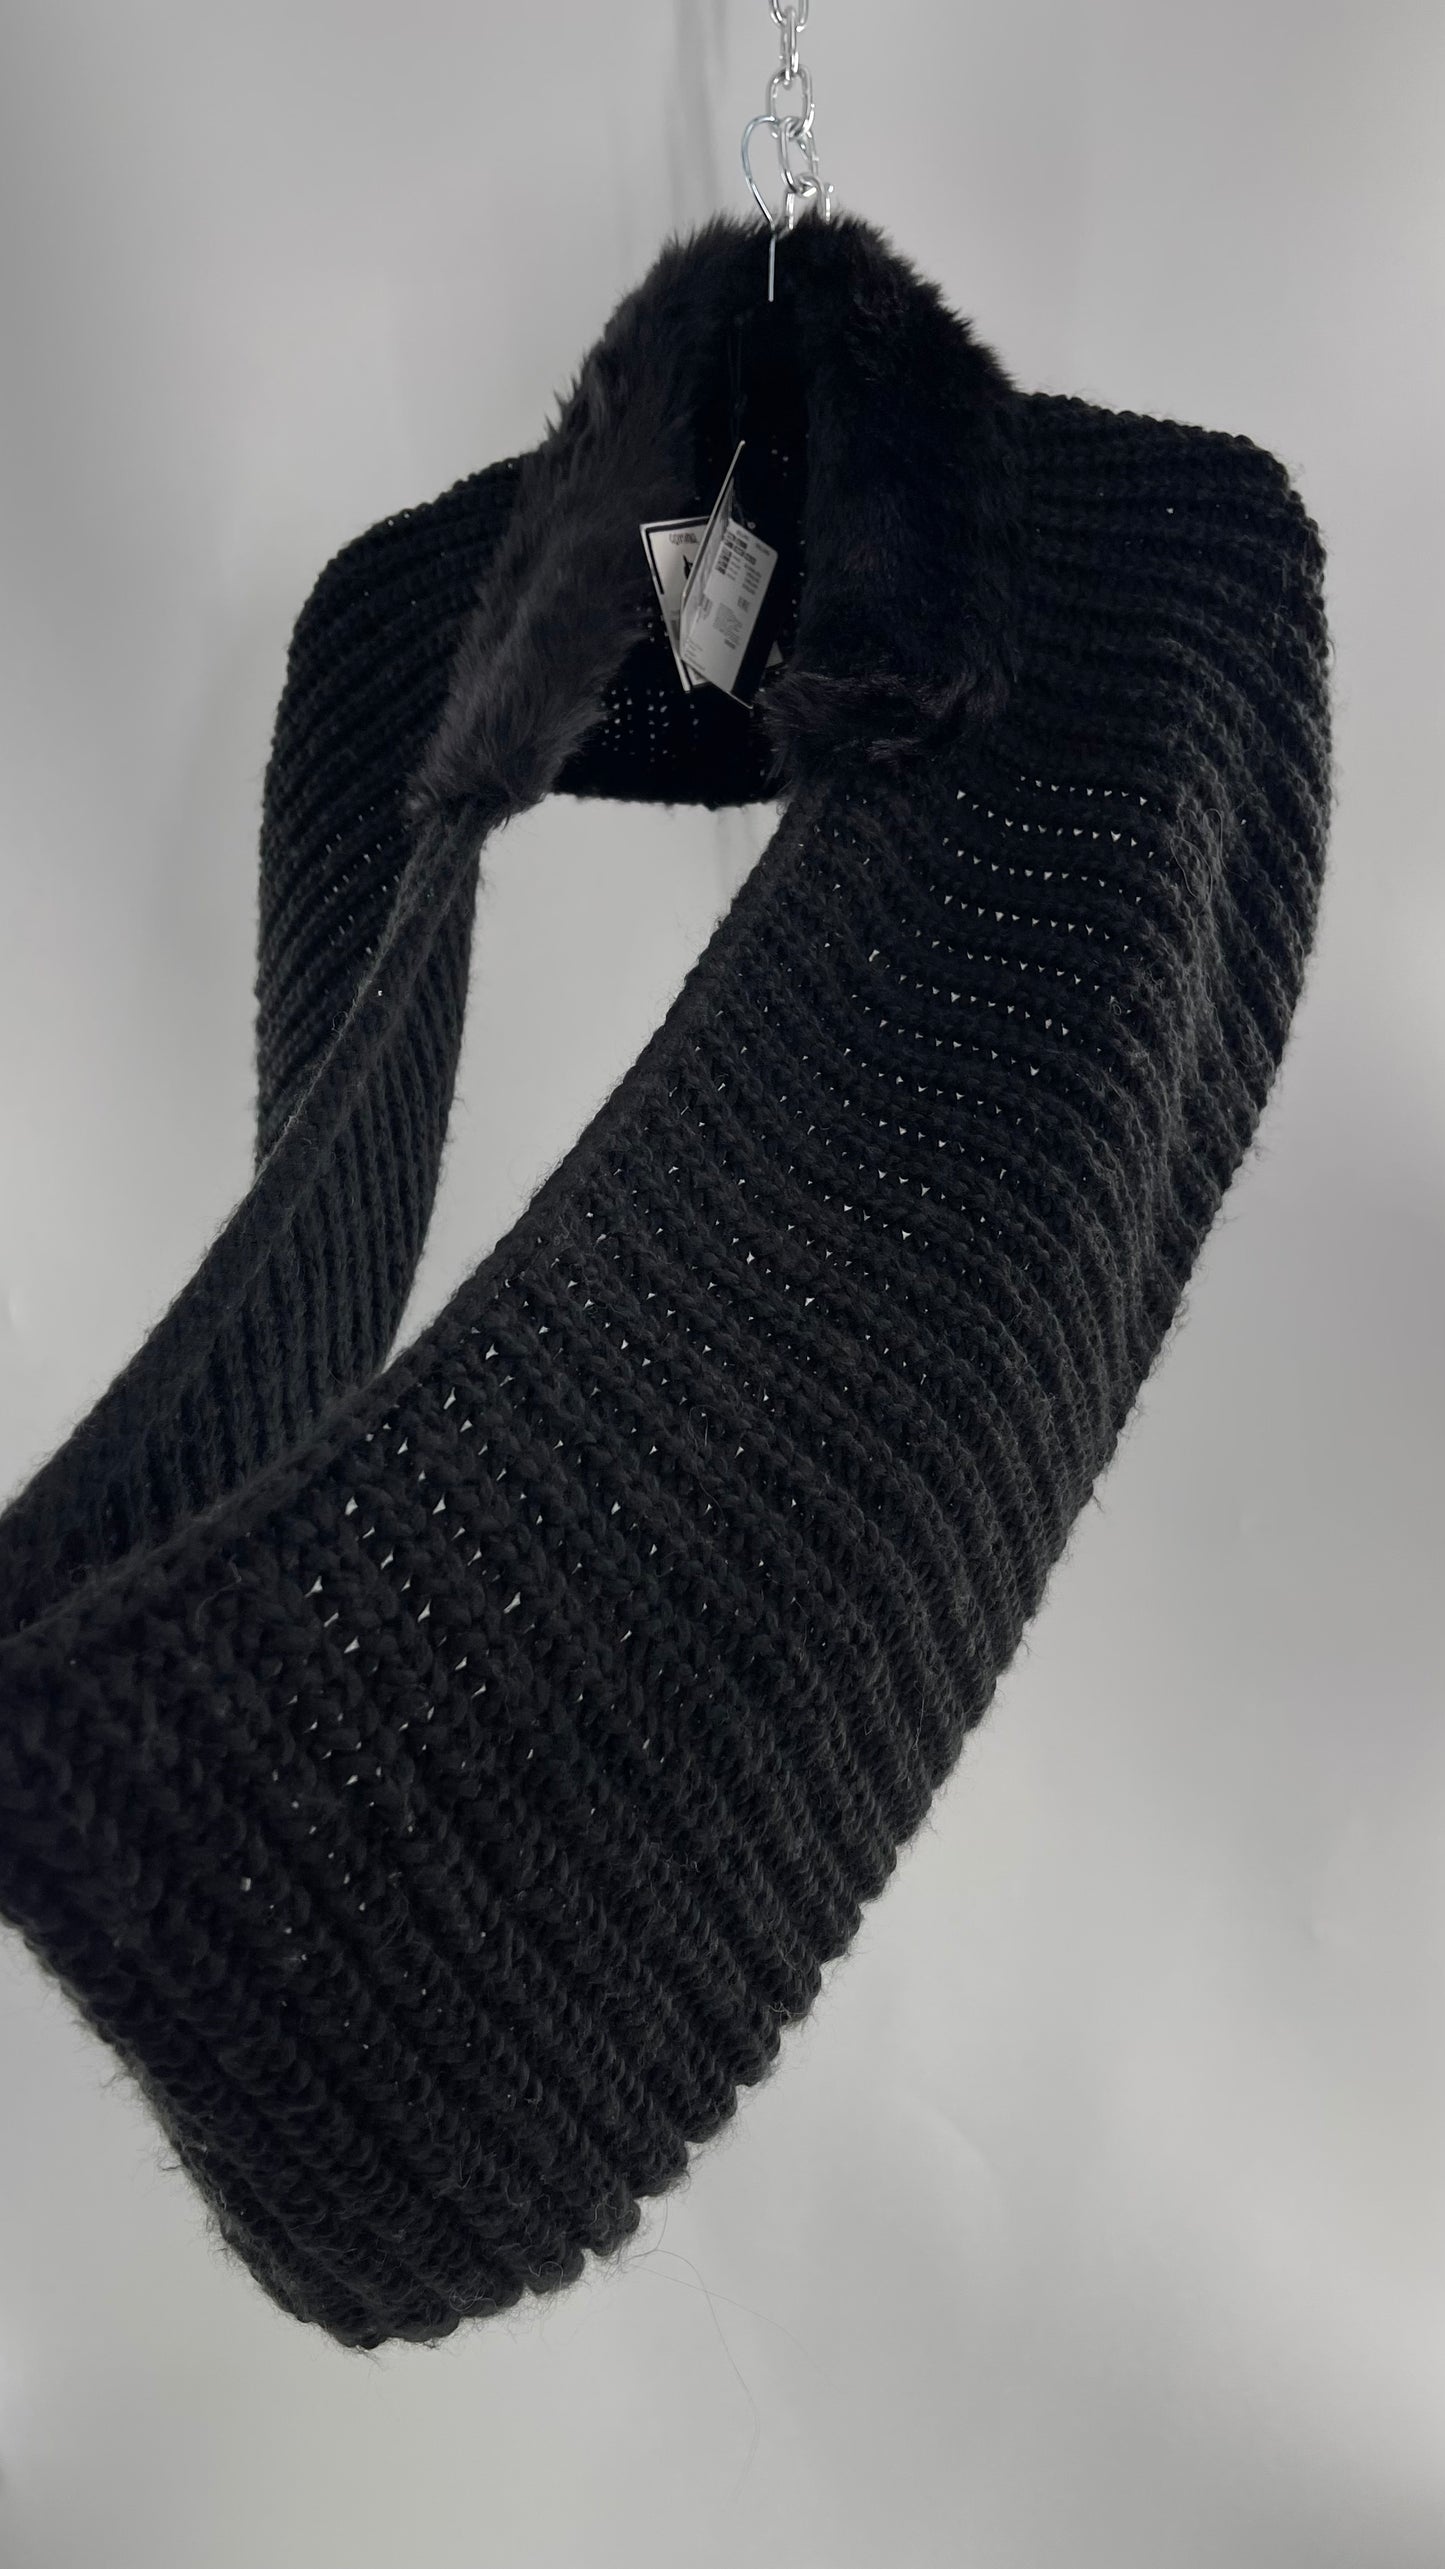 Comma Black Knit Infinity Scarf with Fur Trim Collar and Tags Attached